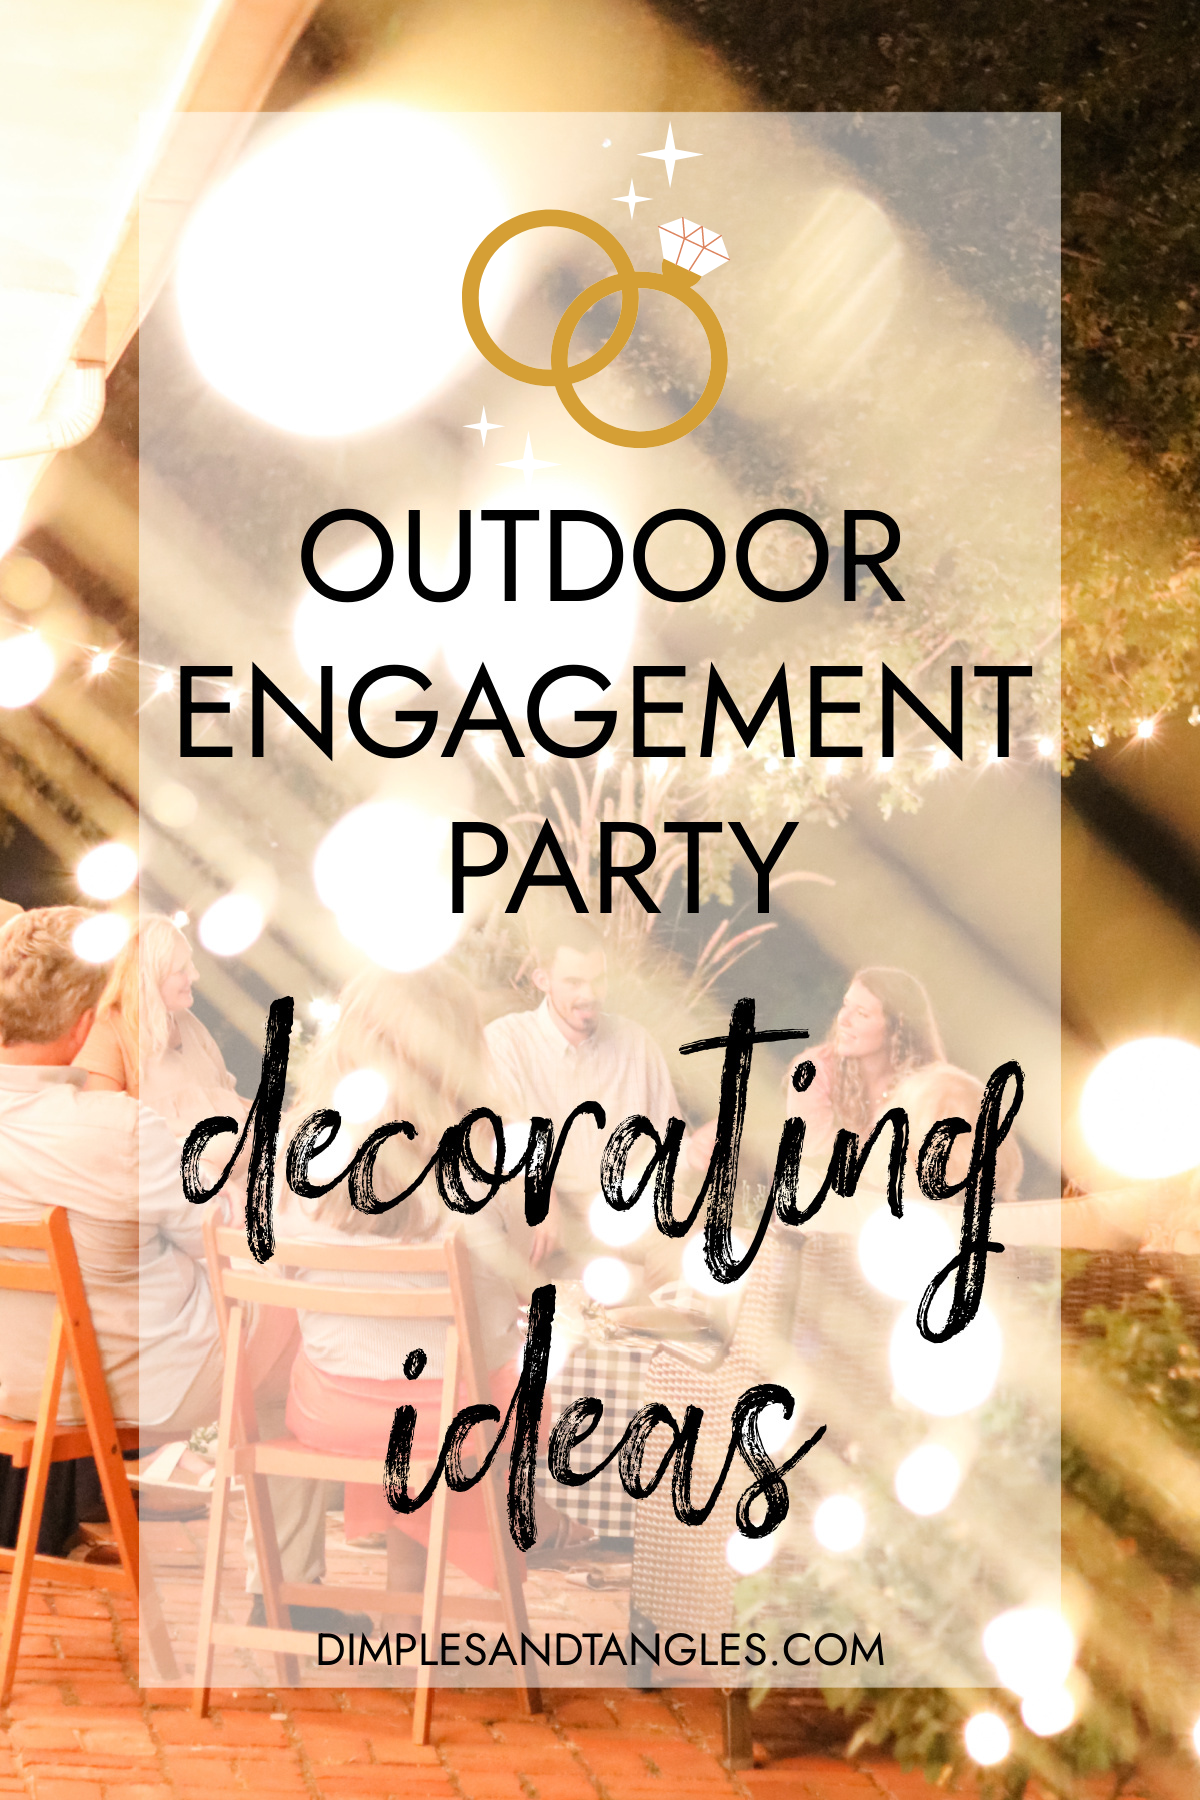 Engagment party, outdoor party, outdoor photo booth, proposal decorations